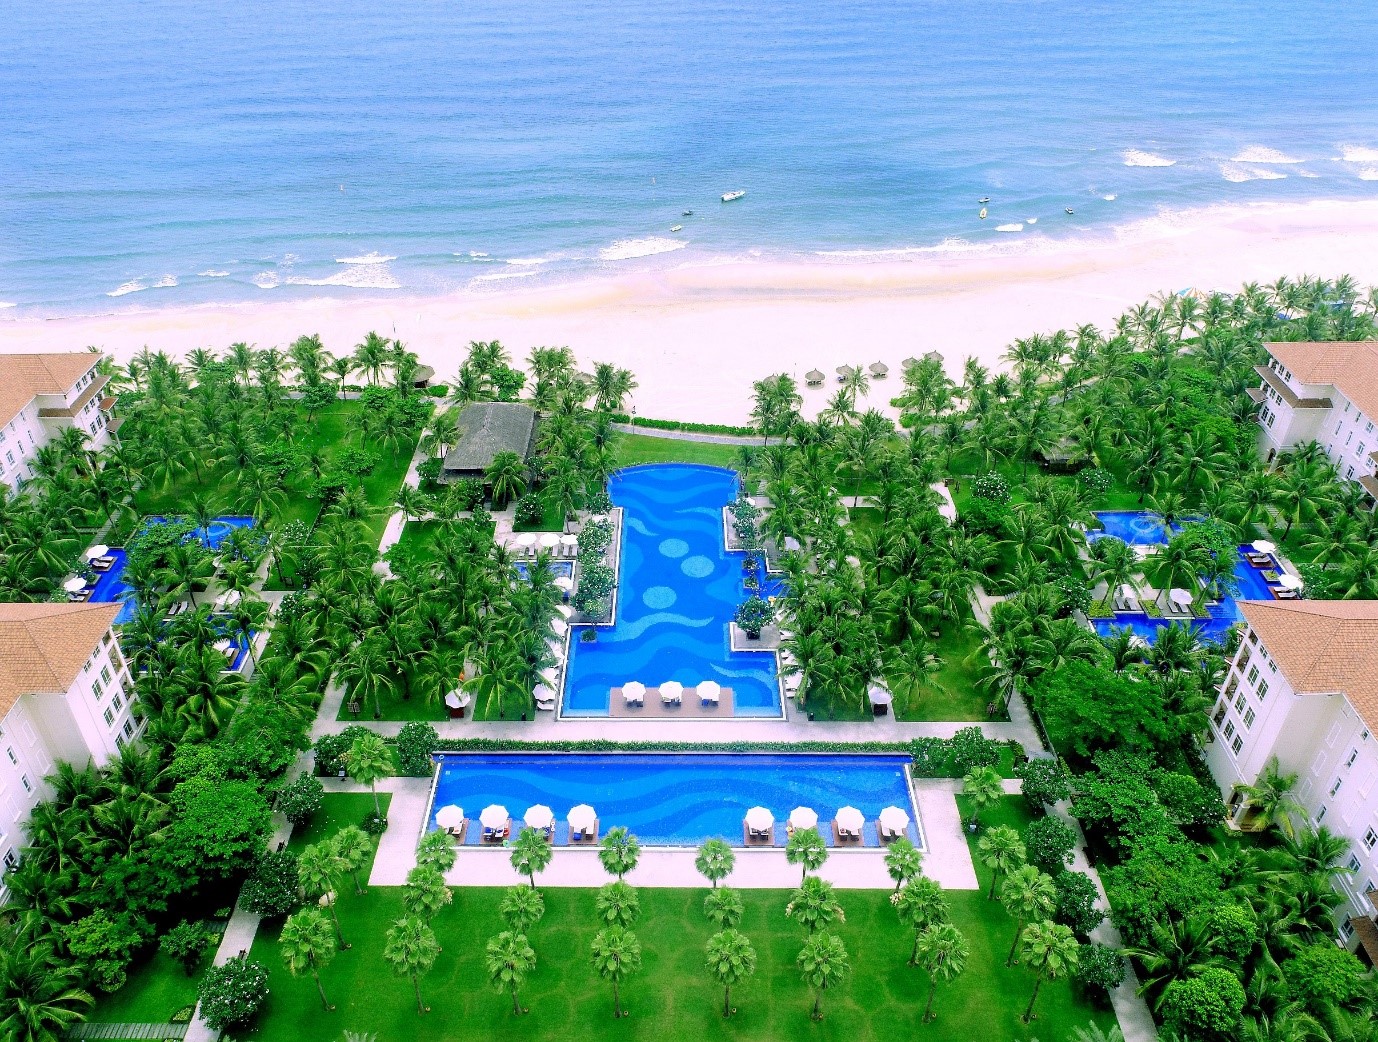 DANANG MARRIOTT RESORT & SPA OPENS ITS DOORS, INTRODUCING A NEW FAMILY & LIFESTYLE OASIS TO VIETNAM